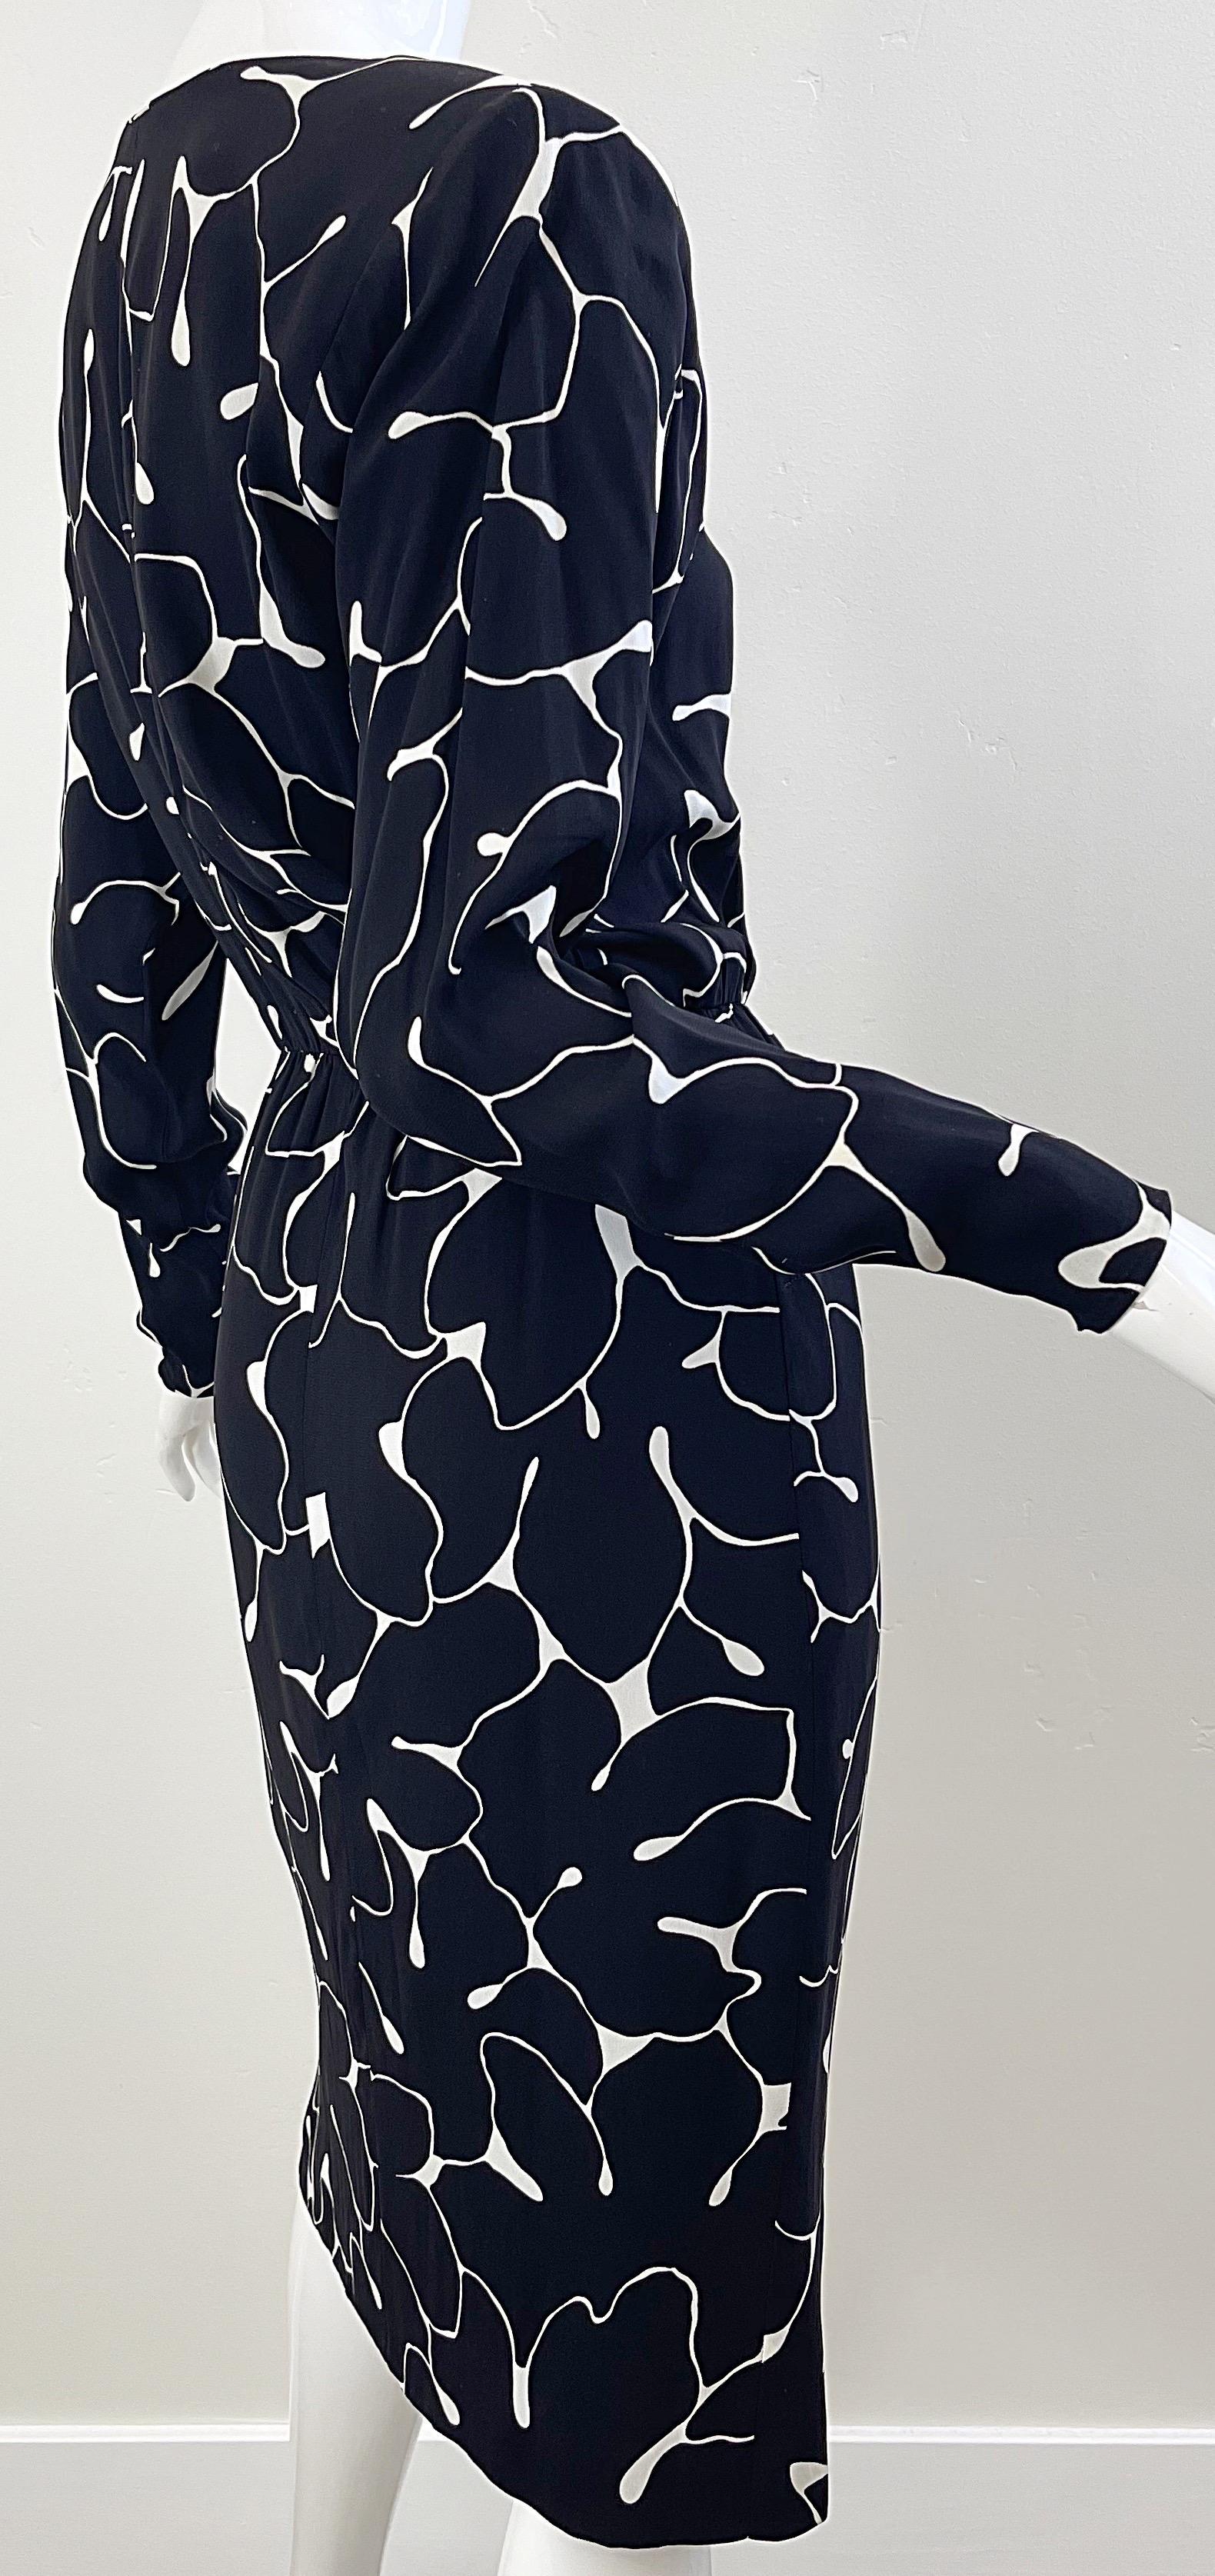 Yves Saint Laurent 1980s Black and White Abstract Flower Print Silk Crepe Dress For Sale 3